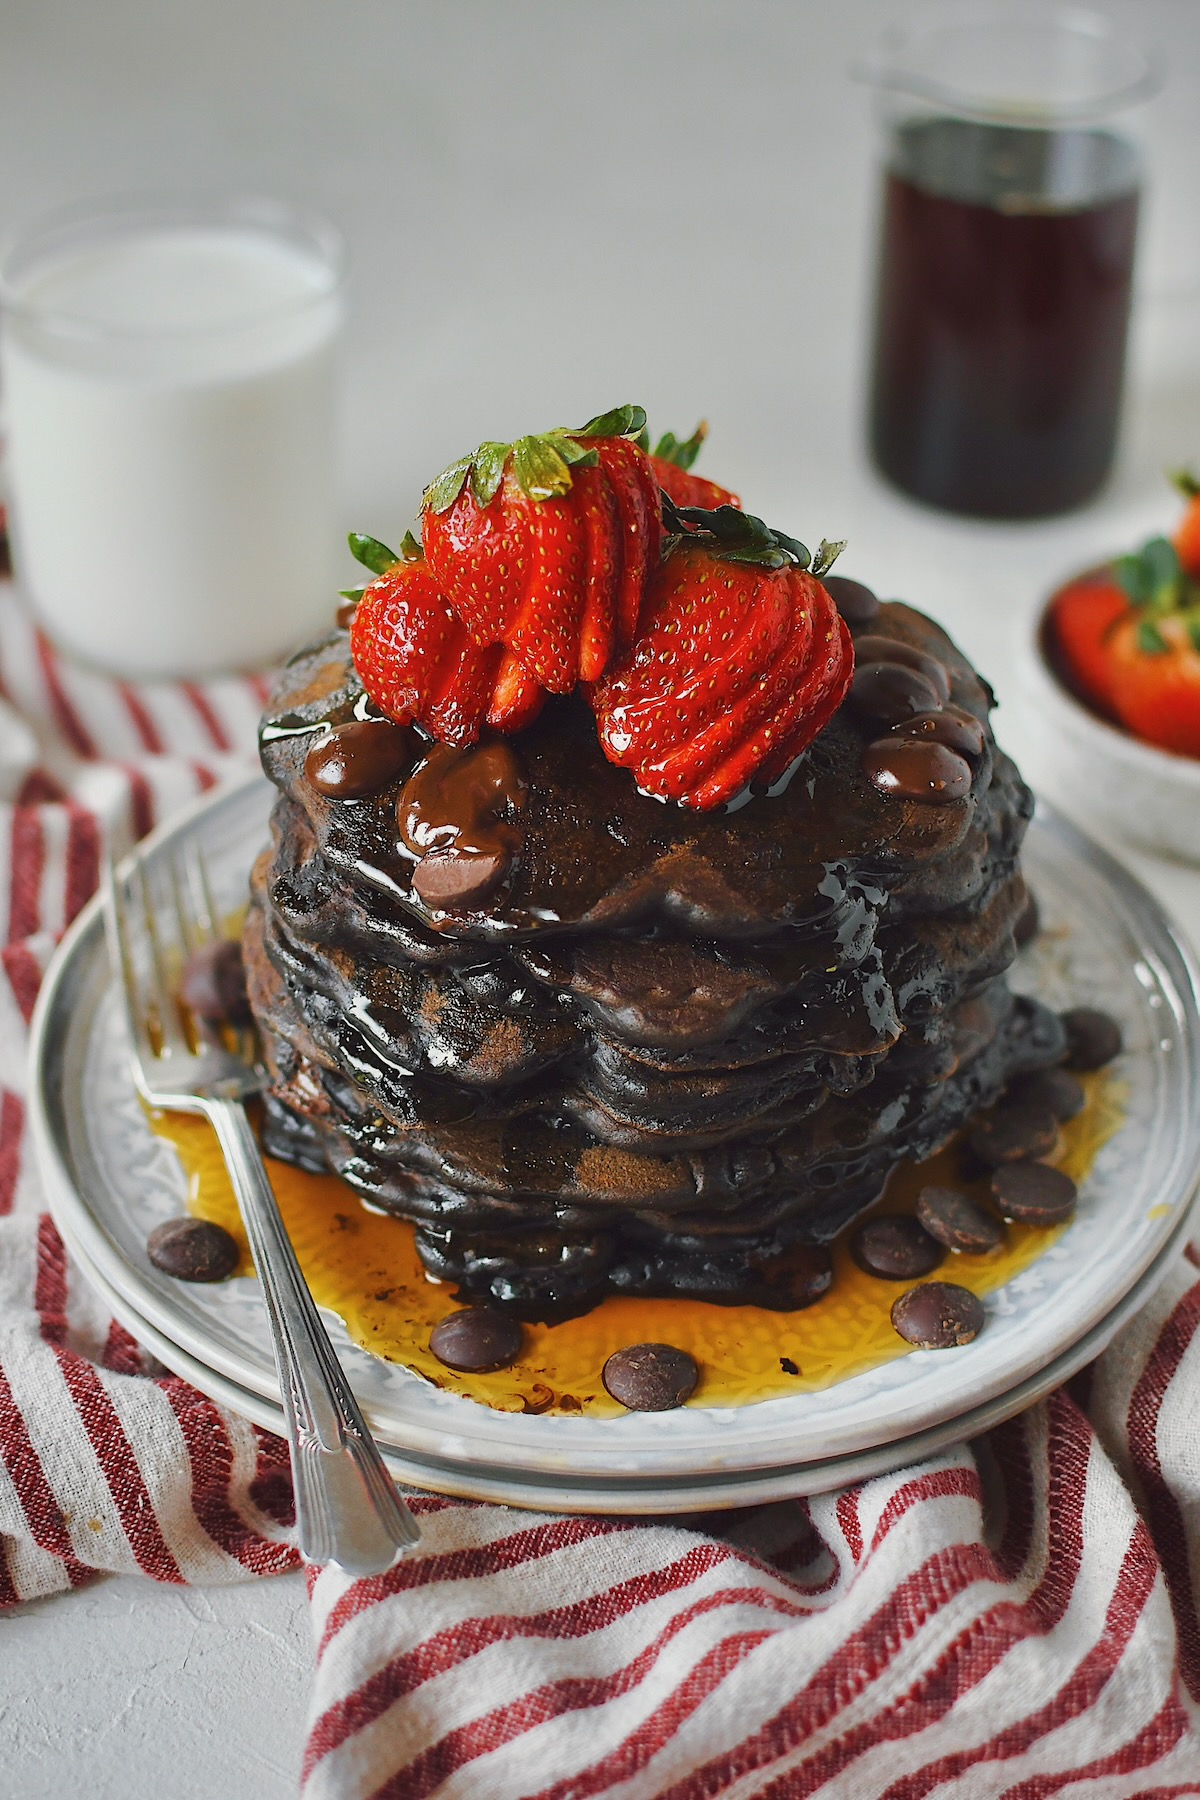 Chocolate Strawberry Pancakes stacked high, topped with sliced strawberries, extra chocolate chips, and a generous dose of maple syrup!